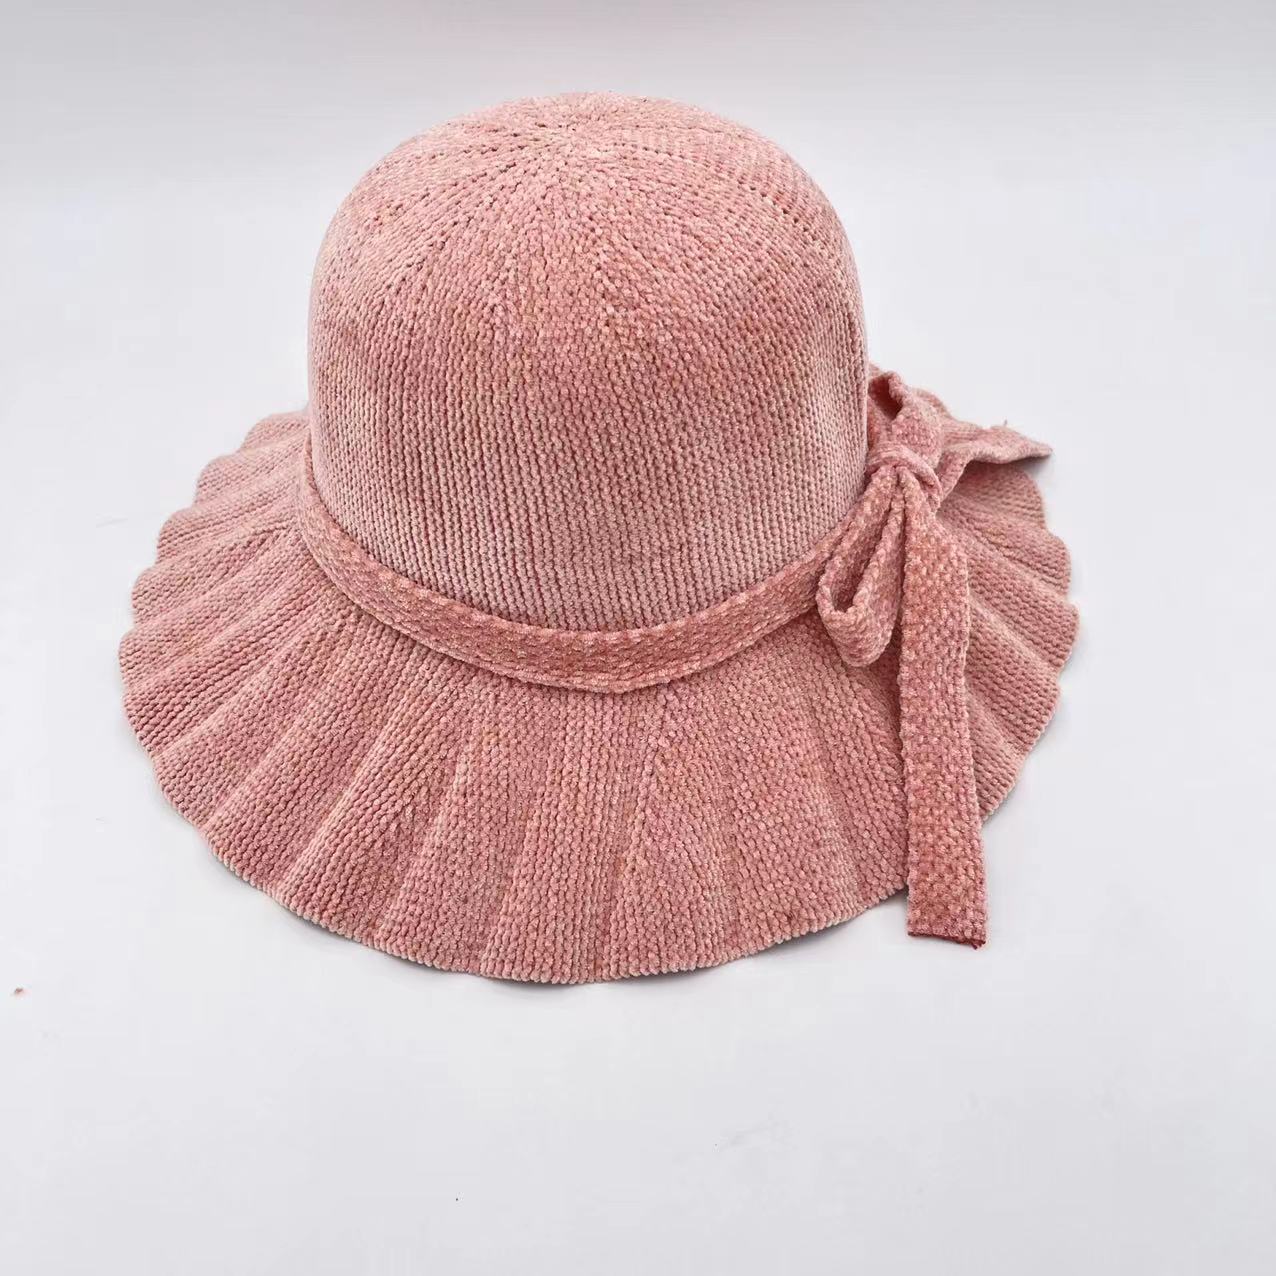 New Chenille Bow Ribbon Foldable Outing Casual Fisherman Hat